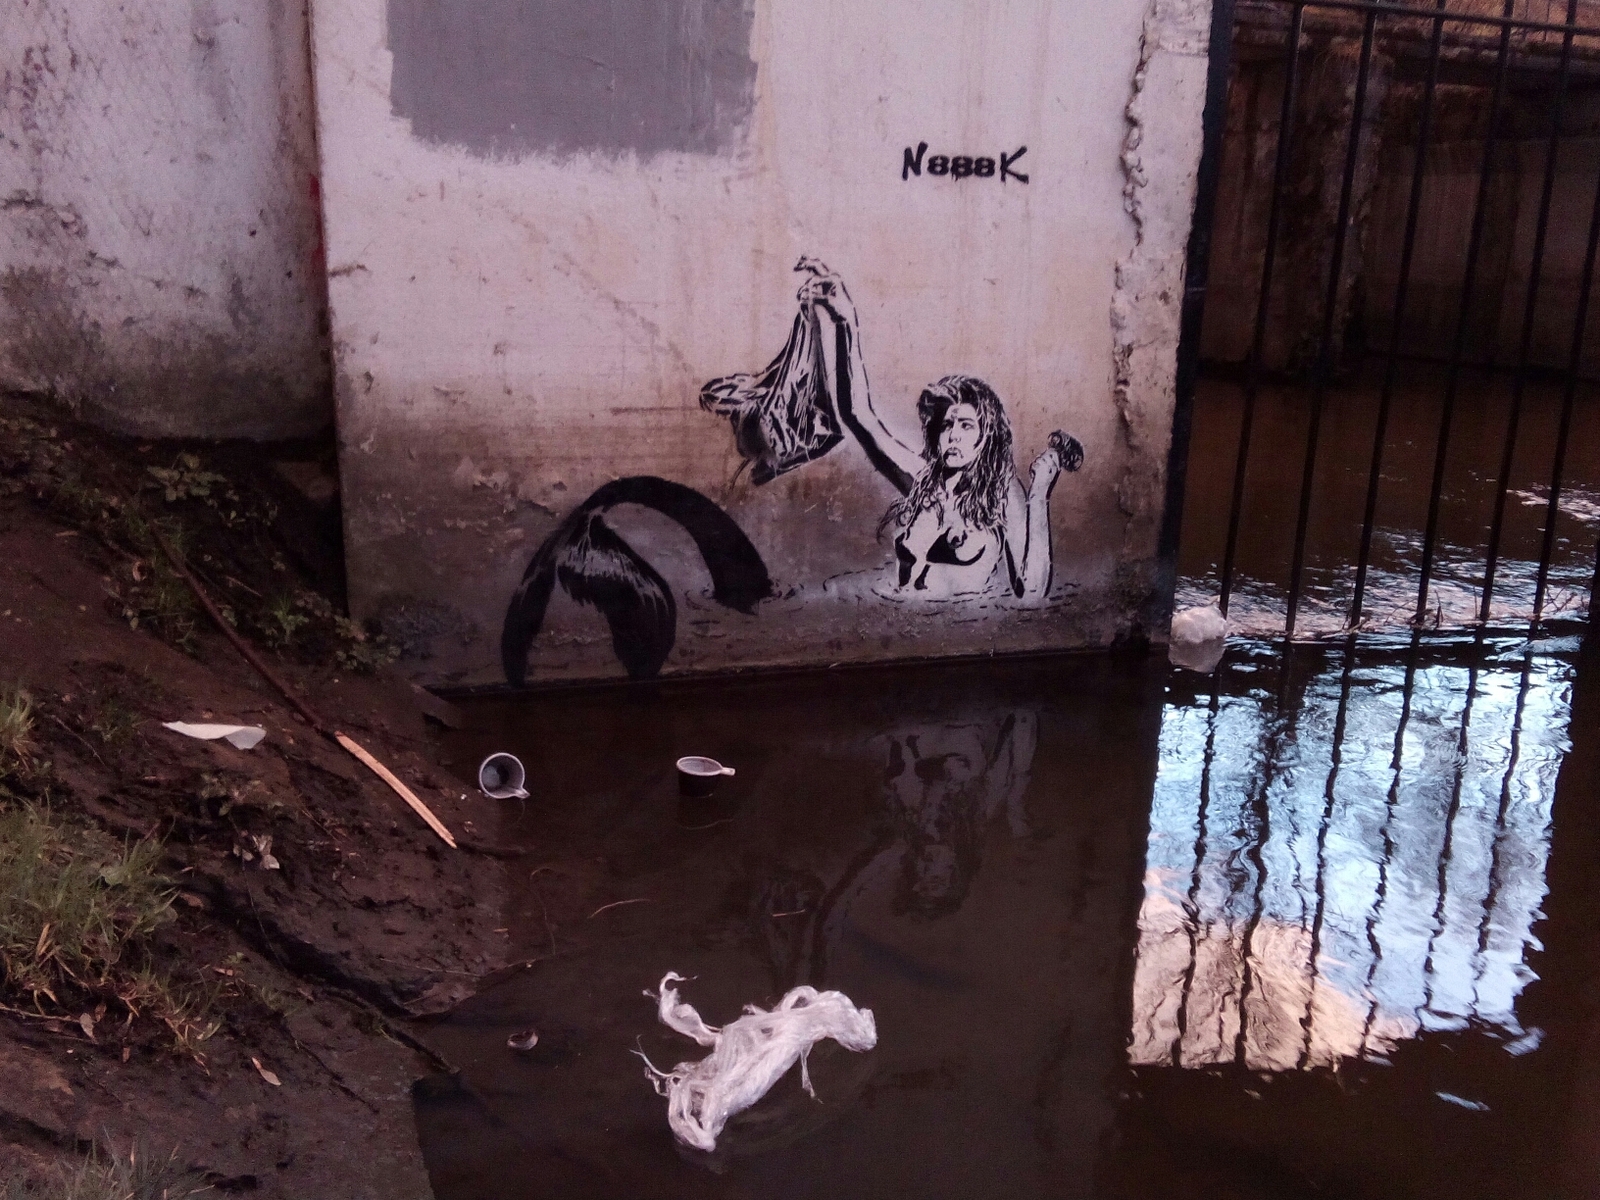 Mermaid on the wall in one of the Moscow rivers - My, Graffiti, Street art, Garbage, Mermaid, Drawing, The photo, Water, N888k